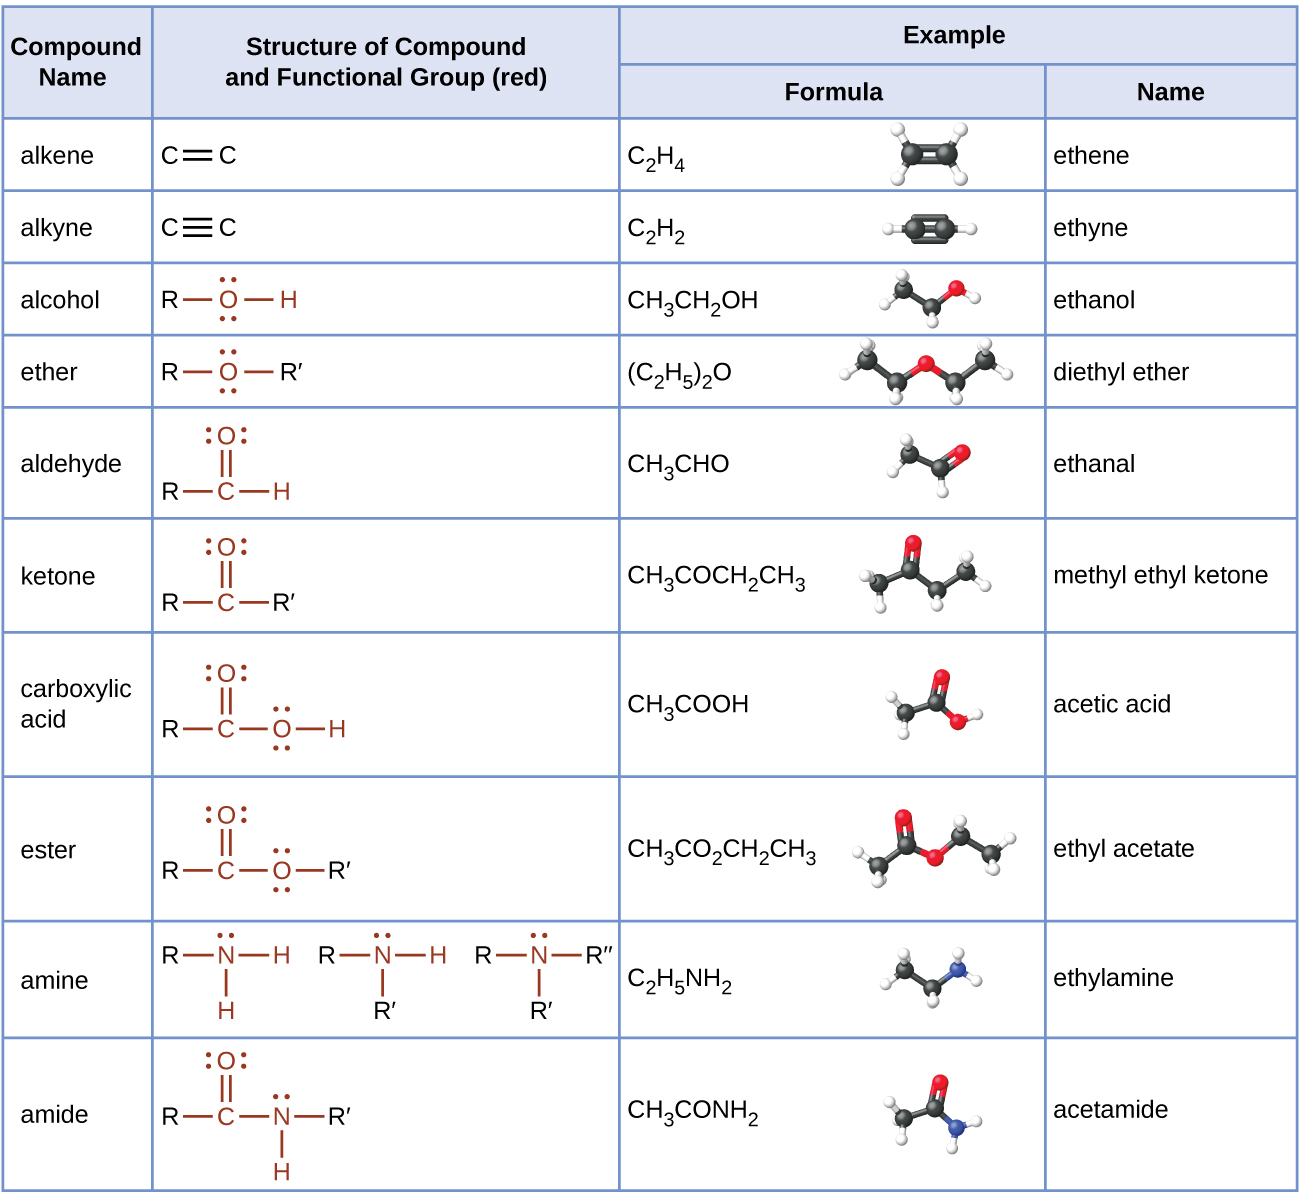 This table provides compound names, structures with functional groups in red, and examples that include formulas, structural formulas, ball-and-stick models, and names. Compound names include alkene, alkyne, alcohol, ether, aldehyde, ketone, carboxylic acid, ester, amine, and amide. Alkenes have a double bond. A formula is C subscript 2 H subscript 4 which is named ethene. The ball-and-stick model shows two black balls forming a double bond and each is bonded to two white balls. Alkynes have a triple bond. A formula is C subscript 2 H subscript 2 which is named ethyne. The ball-and-stick model shows two black balls with a triple bond between them each bonded to one white ball. Alcohols have an O H group. The O has two pairs of electron dots. A formula is C H subscript 3 C H subscript 2 O H which is named ethanol. The ball-and-stick model shows two black balls and one red ball bonded to each other with a single bond. There are four white balls visible. Ethers have an O atom in the structure between two R groups. The O atom has two sets of electron dots. A formula is ( C subscript 2 H subscript 5 ) subscript 2 O which is named ethanal. The ball-and-stick model shows two black balls bonded to a red ball which is bonded to two more black balls. All bonds are single. There are five white balls visible. Aldehydes have a C atom to which a double bonded O and an H and an R are included in the structure. The O atom has two sets of electron dots. A formula is C H subscript 3 C H O which is named Ethanal. The ball-and-stick model shows two black bonds bonded to two red balls. The ball-and-stick model shows two black balls bonded with a single bond and the second black ball forms a double bond with a red ball. There are three white balls visible. Ketones show a C atom to which a double bonded O is attached. The left side of the C atom is bonded to R and the right side is bonded to R prime. The O atom as two sets of electron dots. The formula is C H subscript 3 C O C H subscript 2 C H subscript 3 and is named methyl ethyl ketone. The ball-and-stick models shows four black balls all forming single bonds with each other. The second black ball forms a double bond with a red ball. There are five white balls visible. Carboxylic acids have a C to which a double bonded O and an O H are included in the structure. Each O atom has two sets of electron dots. A formula is C H subscript 3 C O O H which is named ethanoic or acetic acid. The ball-and-stick model shows two black balls and one red ball forming single bonds with each other. The second black ball also forms a double bond with another red ball. Three white balls are visible. Esters have a C atom which forms a double bond with an O atom and single bond with another O atom which has an attached hydrocarbon group in the structure. Each O atom has two sets of electron dots. A formula is C H subscript 3 C O subscript 2 C H subscript 2 C H subscript 3 which is named ethyl acetate. The ball-and-stick model shows two black balls, a red ball, and two more black balls forming single bonds with each other. The second black ball forms a double bond with another red ball. There are five white balls visible. Amines have an N atom in the structure to which three hydrocarbon groups, two hydrocarbon groups and one H atom, or one hydrocarbon group and two H atoms may be bonded. Each n has a single set of electron dots. A formula is C subscript 2 H subscript 5 N H subscript 2 which is named ethylamine. The ball-and-stick model shows two black balls and one blue ball forming single bonds with each other. There are five white balls visible. Amides have a C to which a double bonded O and single N incorporated in a structure between two hydrocarbon groups. One hydrocarbon group is bonded to the C, the other to the N. Amides can also have a H atom bonded to the N. The O atom as two sets of electron dots, and the N atom has one set. A formula is C H subscript 3 C O N H subscript 2 which is named ethanamide or acetamide. The ball-and-stick model shows two black balls and one blue ball forming single bonds with each other. The second black ball forms a double bond with one red ball. There are four white balls visible.